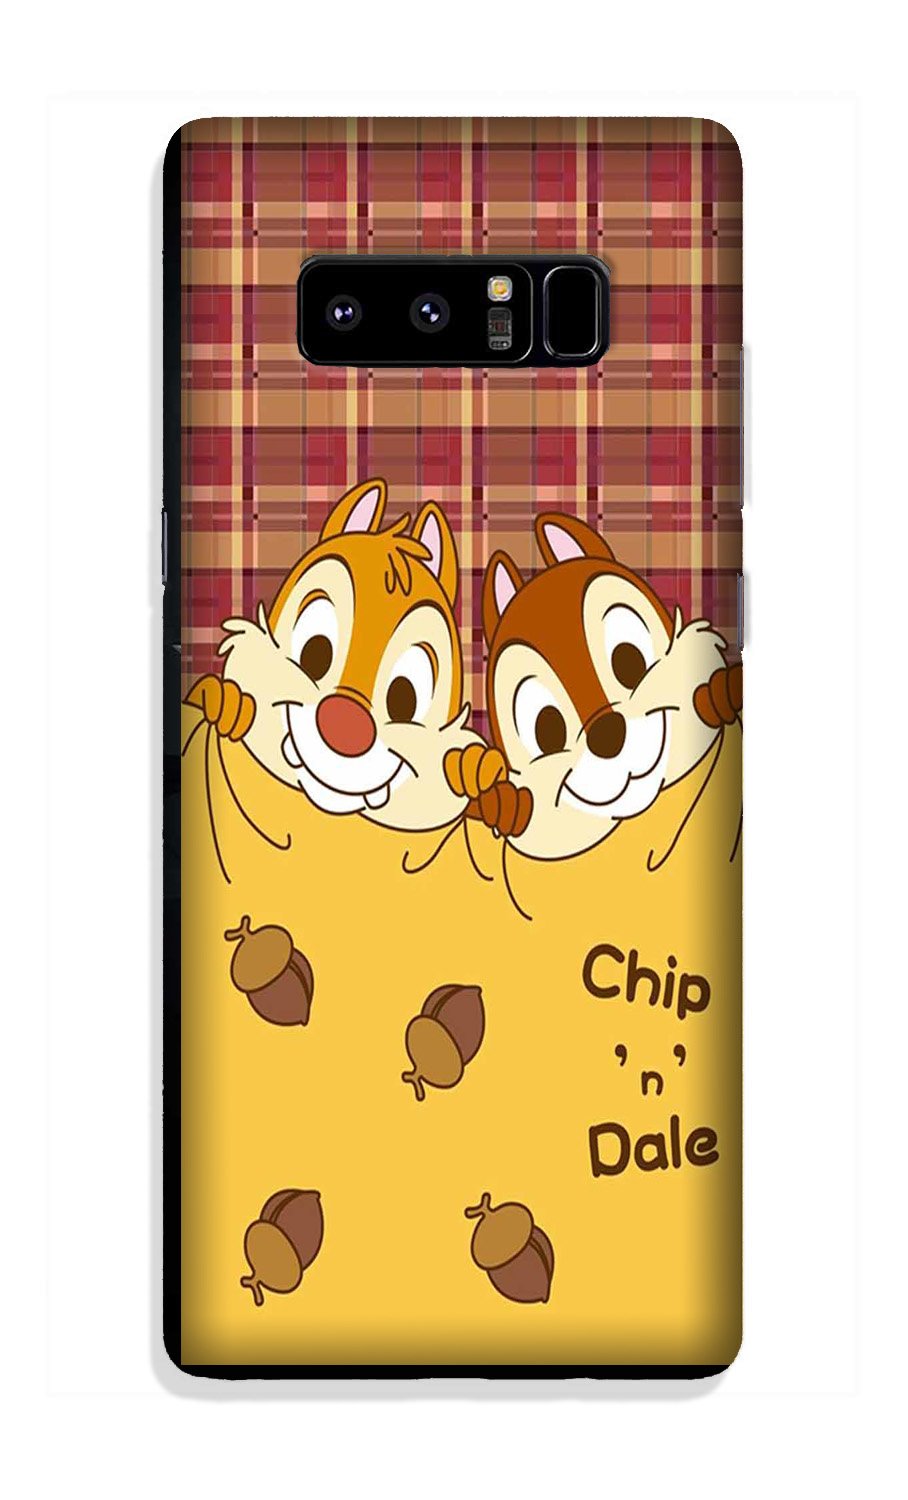 Chip n Dale Mobile Back Case for Galaxy Note 8 (Design - 342)